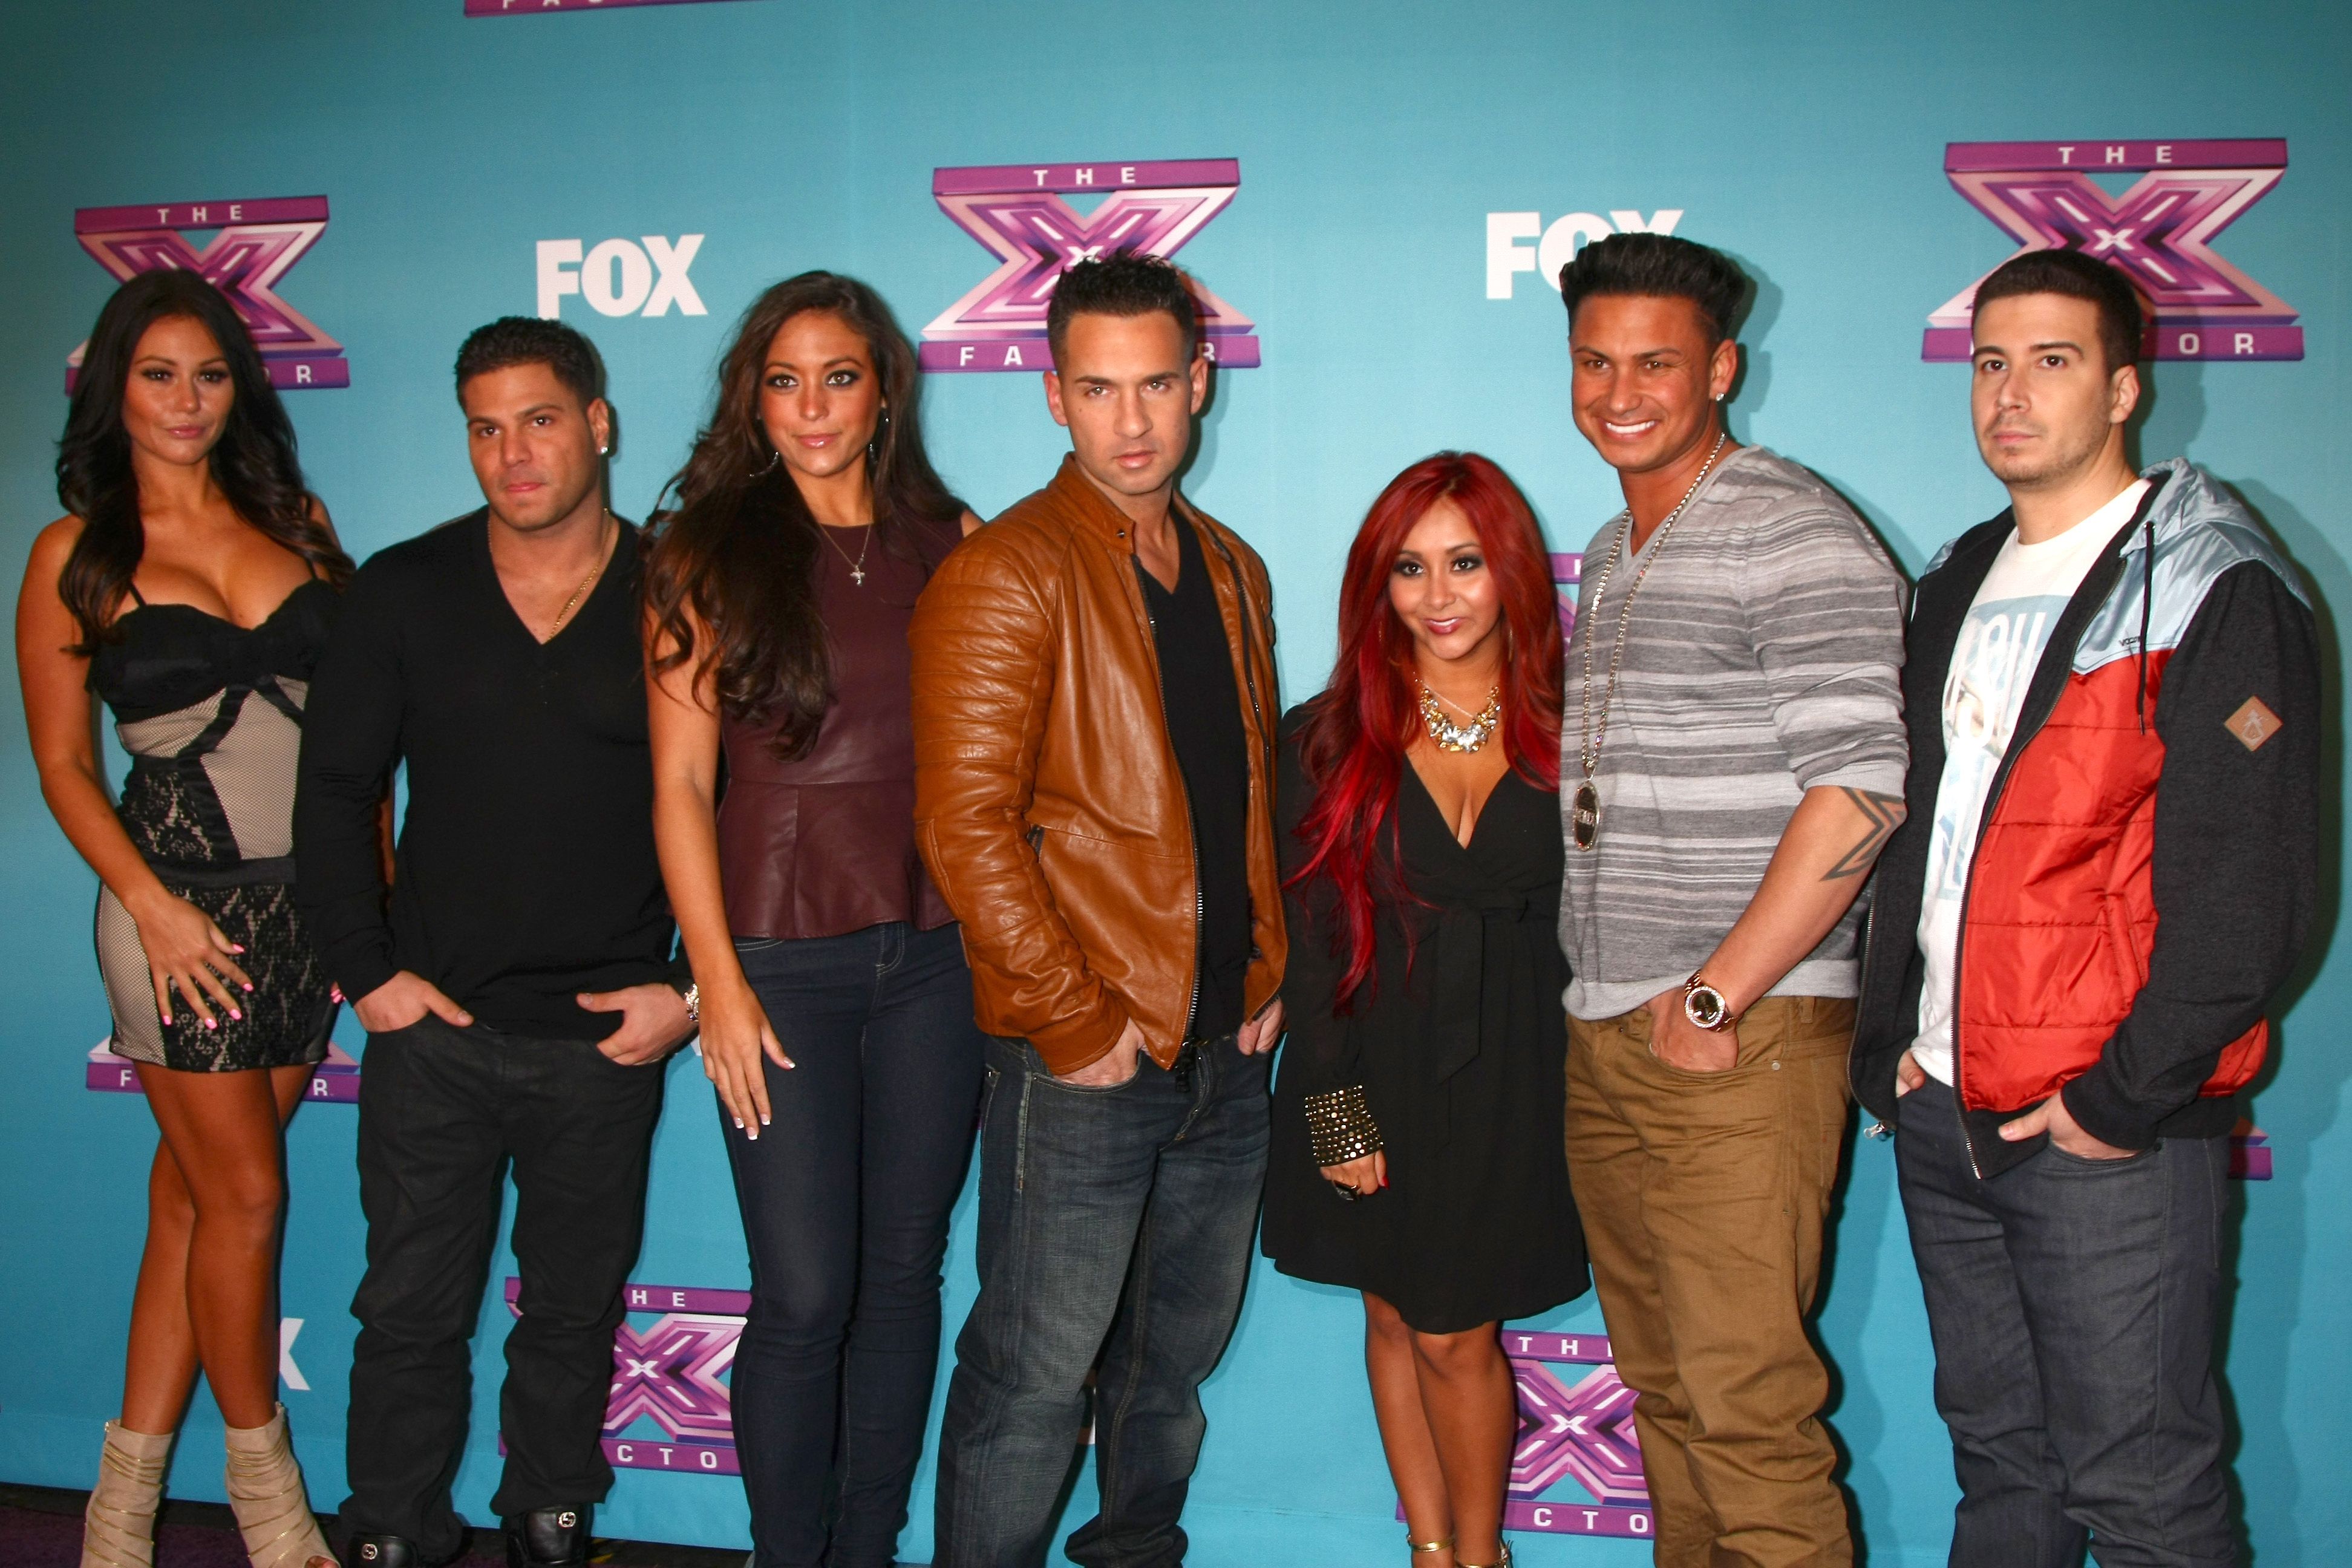 The 'Jersey Shore' cast smiles in group pic.